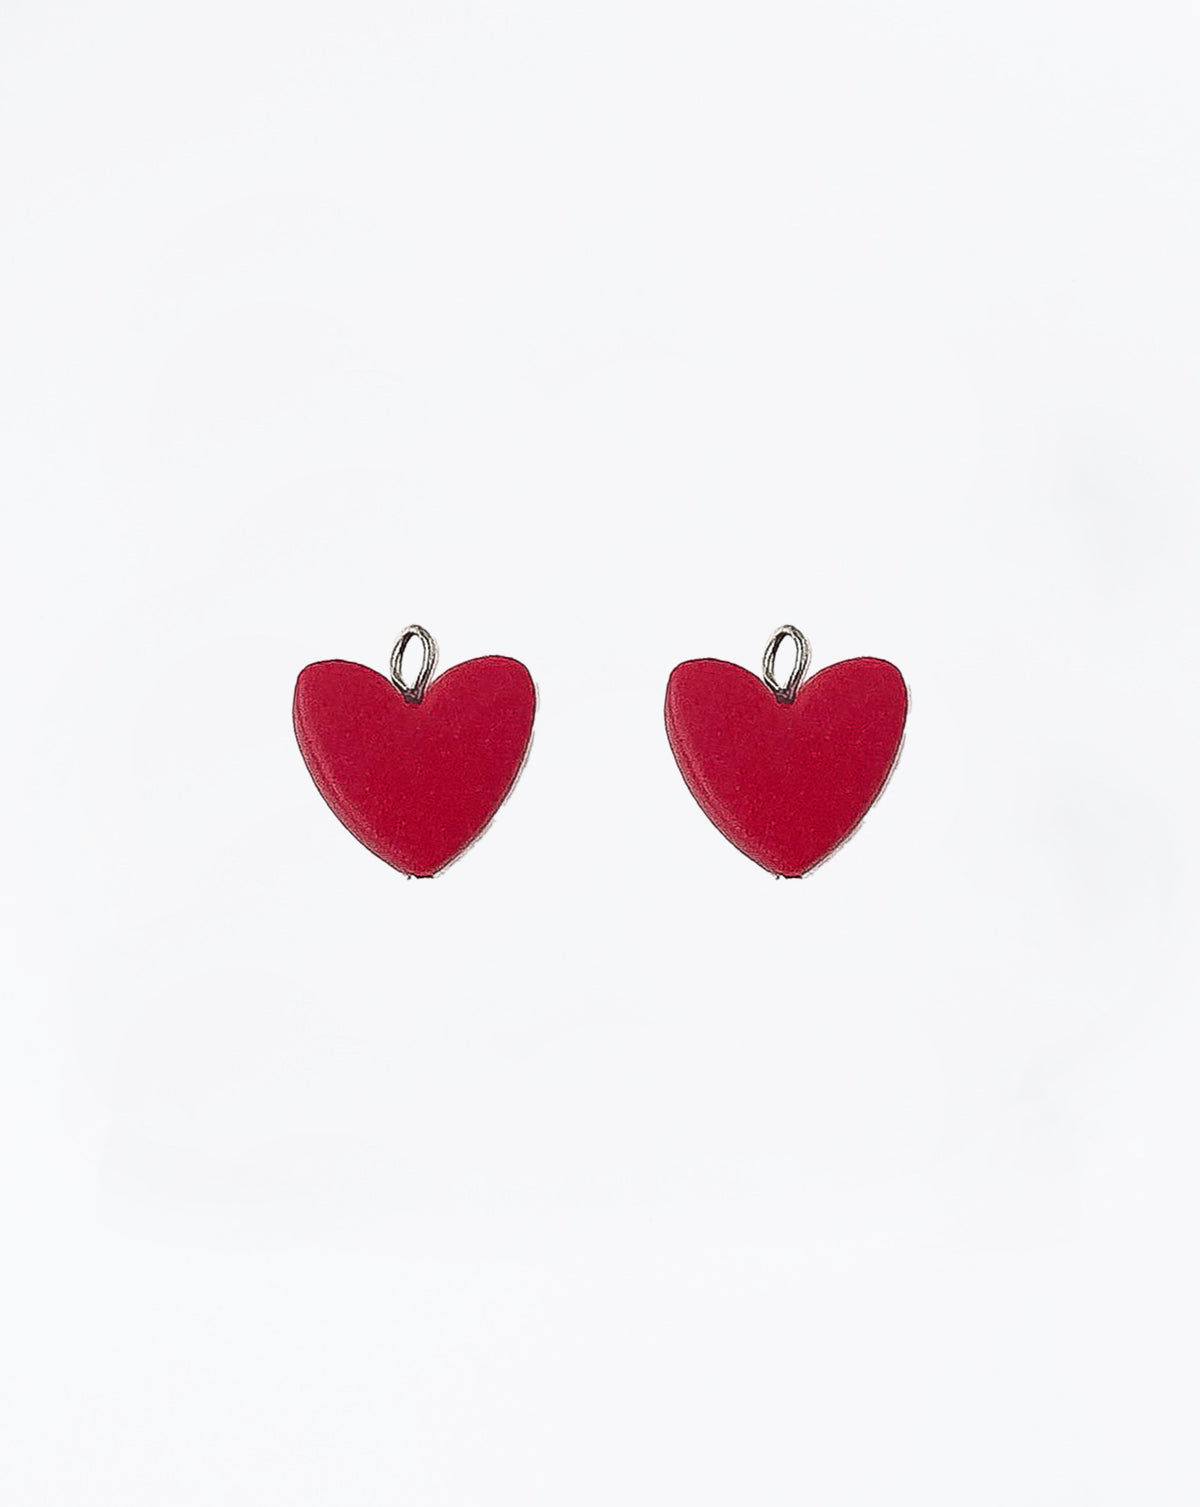 Heart Charms in color red.